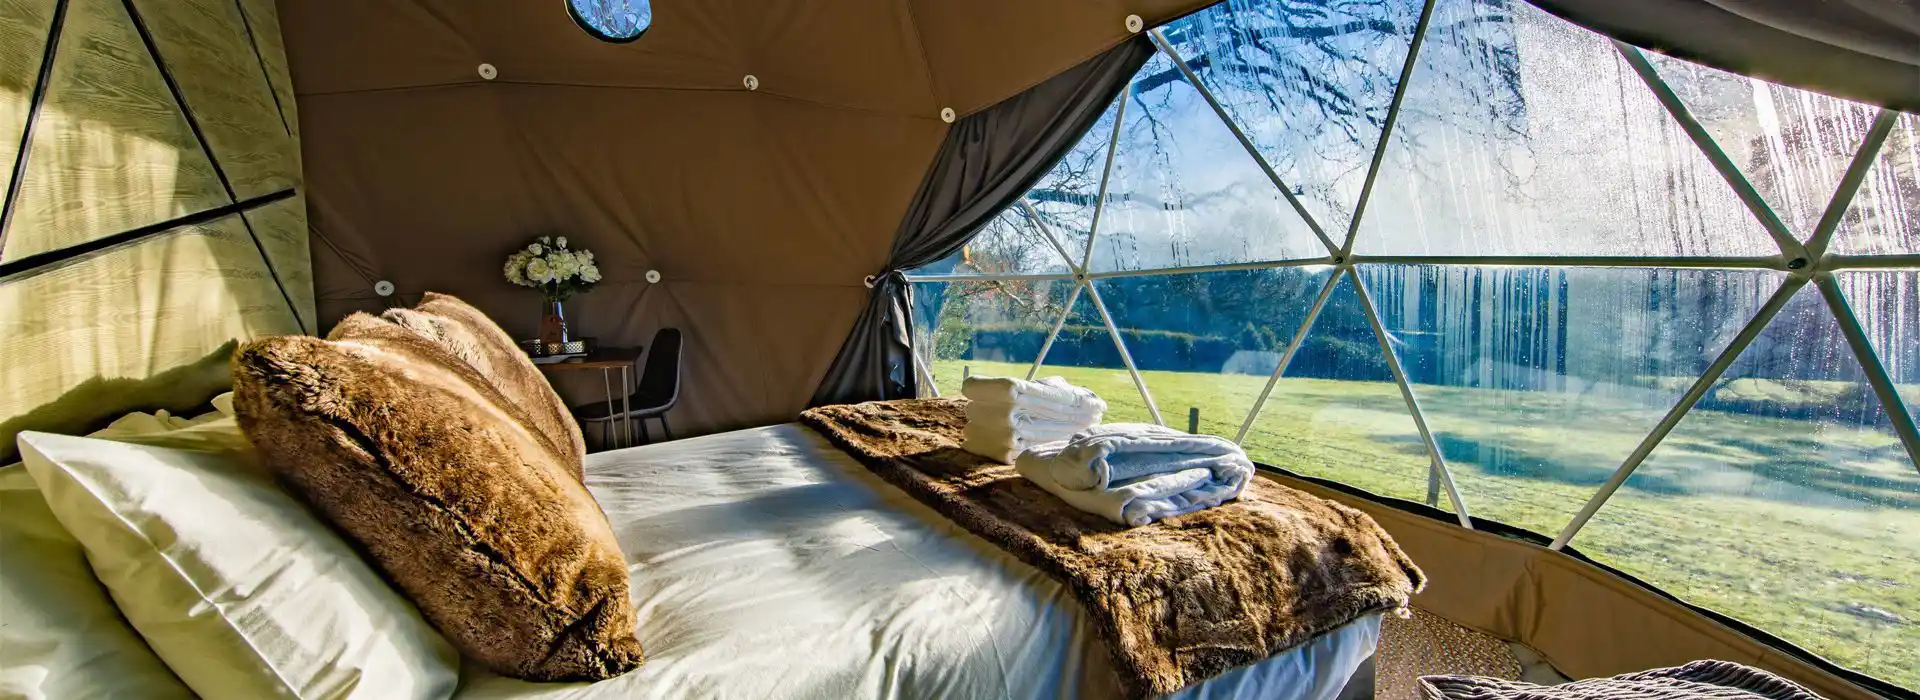 Best luxury glamping sites